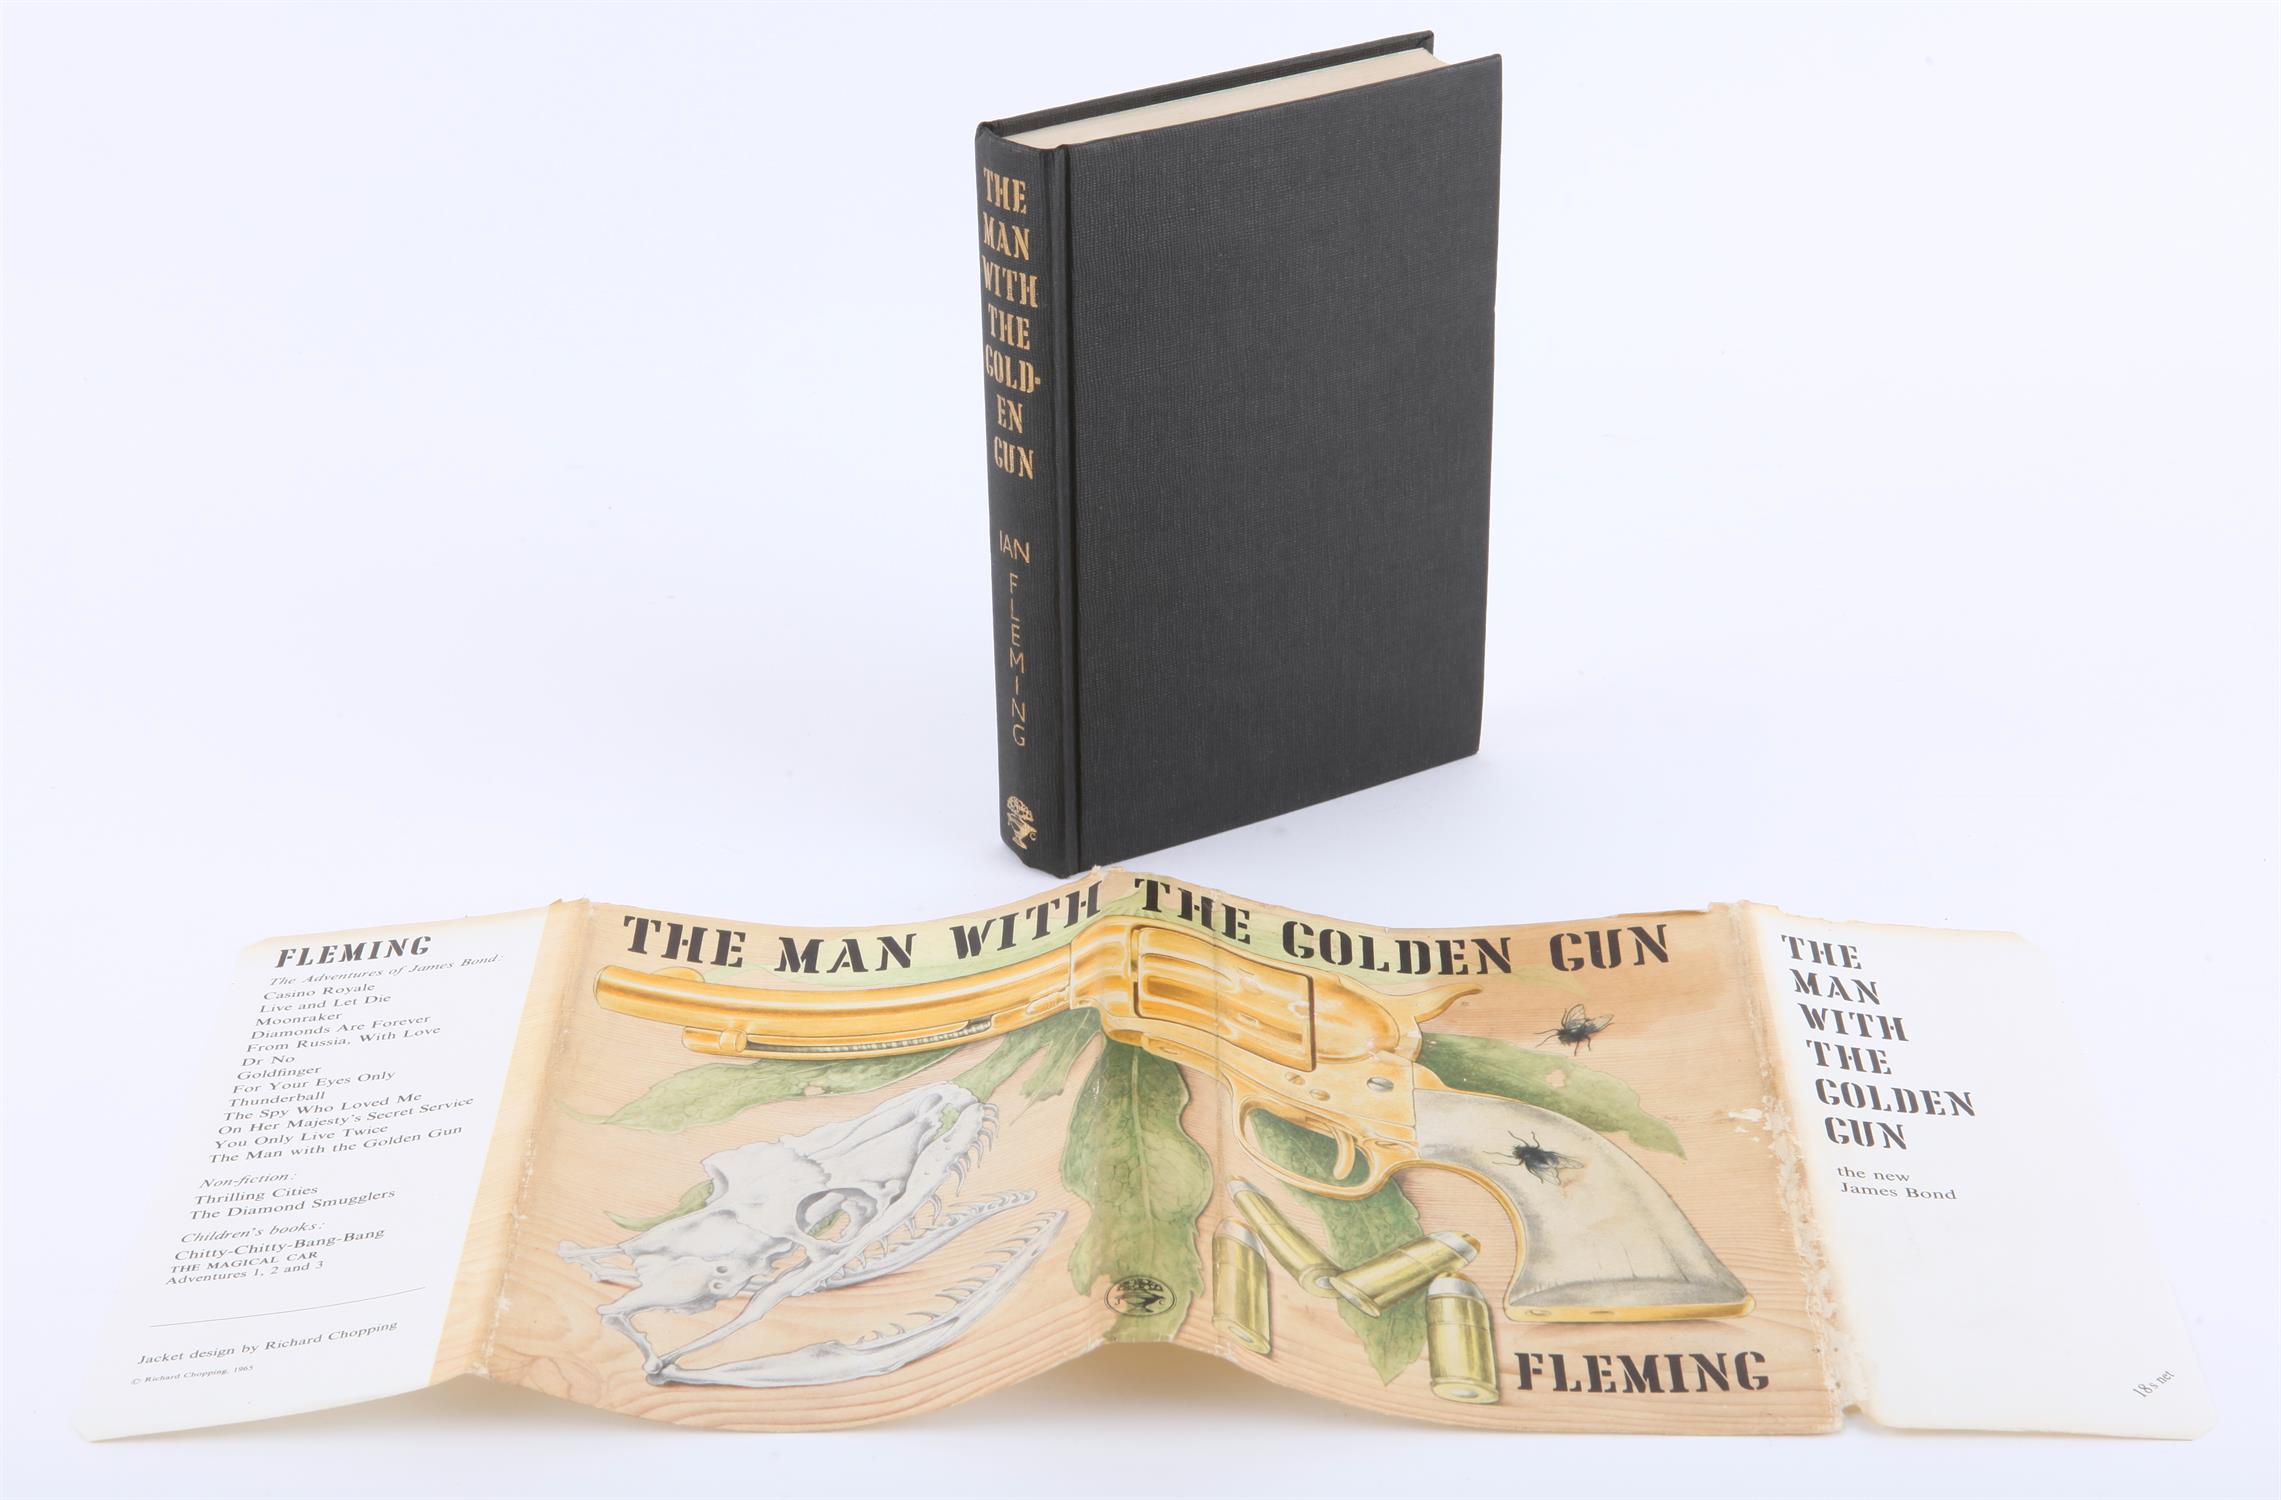 James Bond The Man With the Golden Gun - Ian Fleming First Edition, first impression Hardback book. - Image 2 of 3